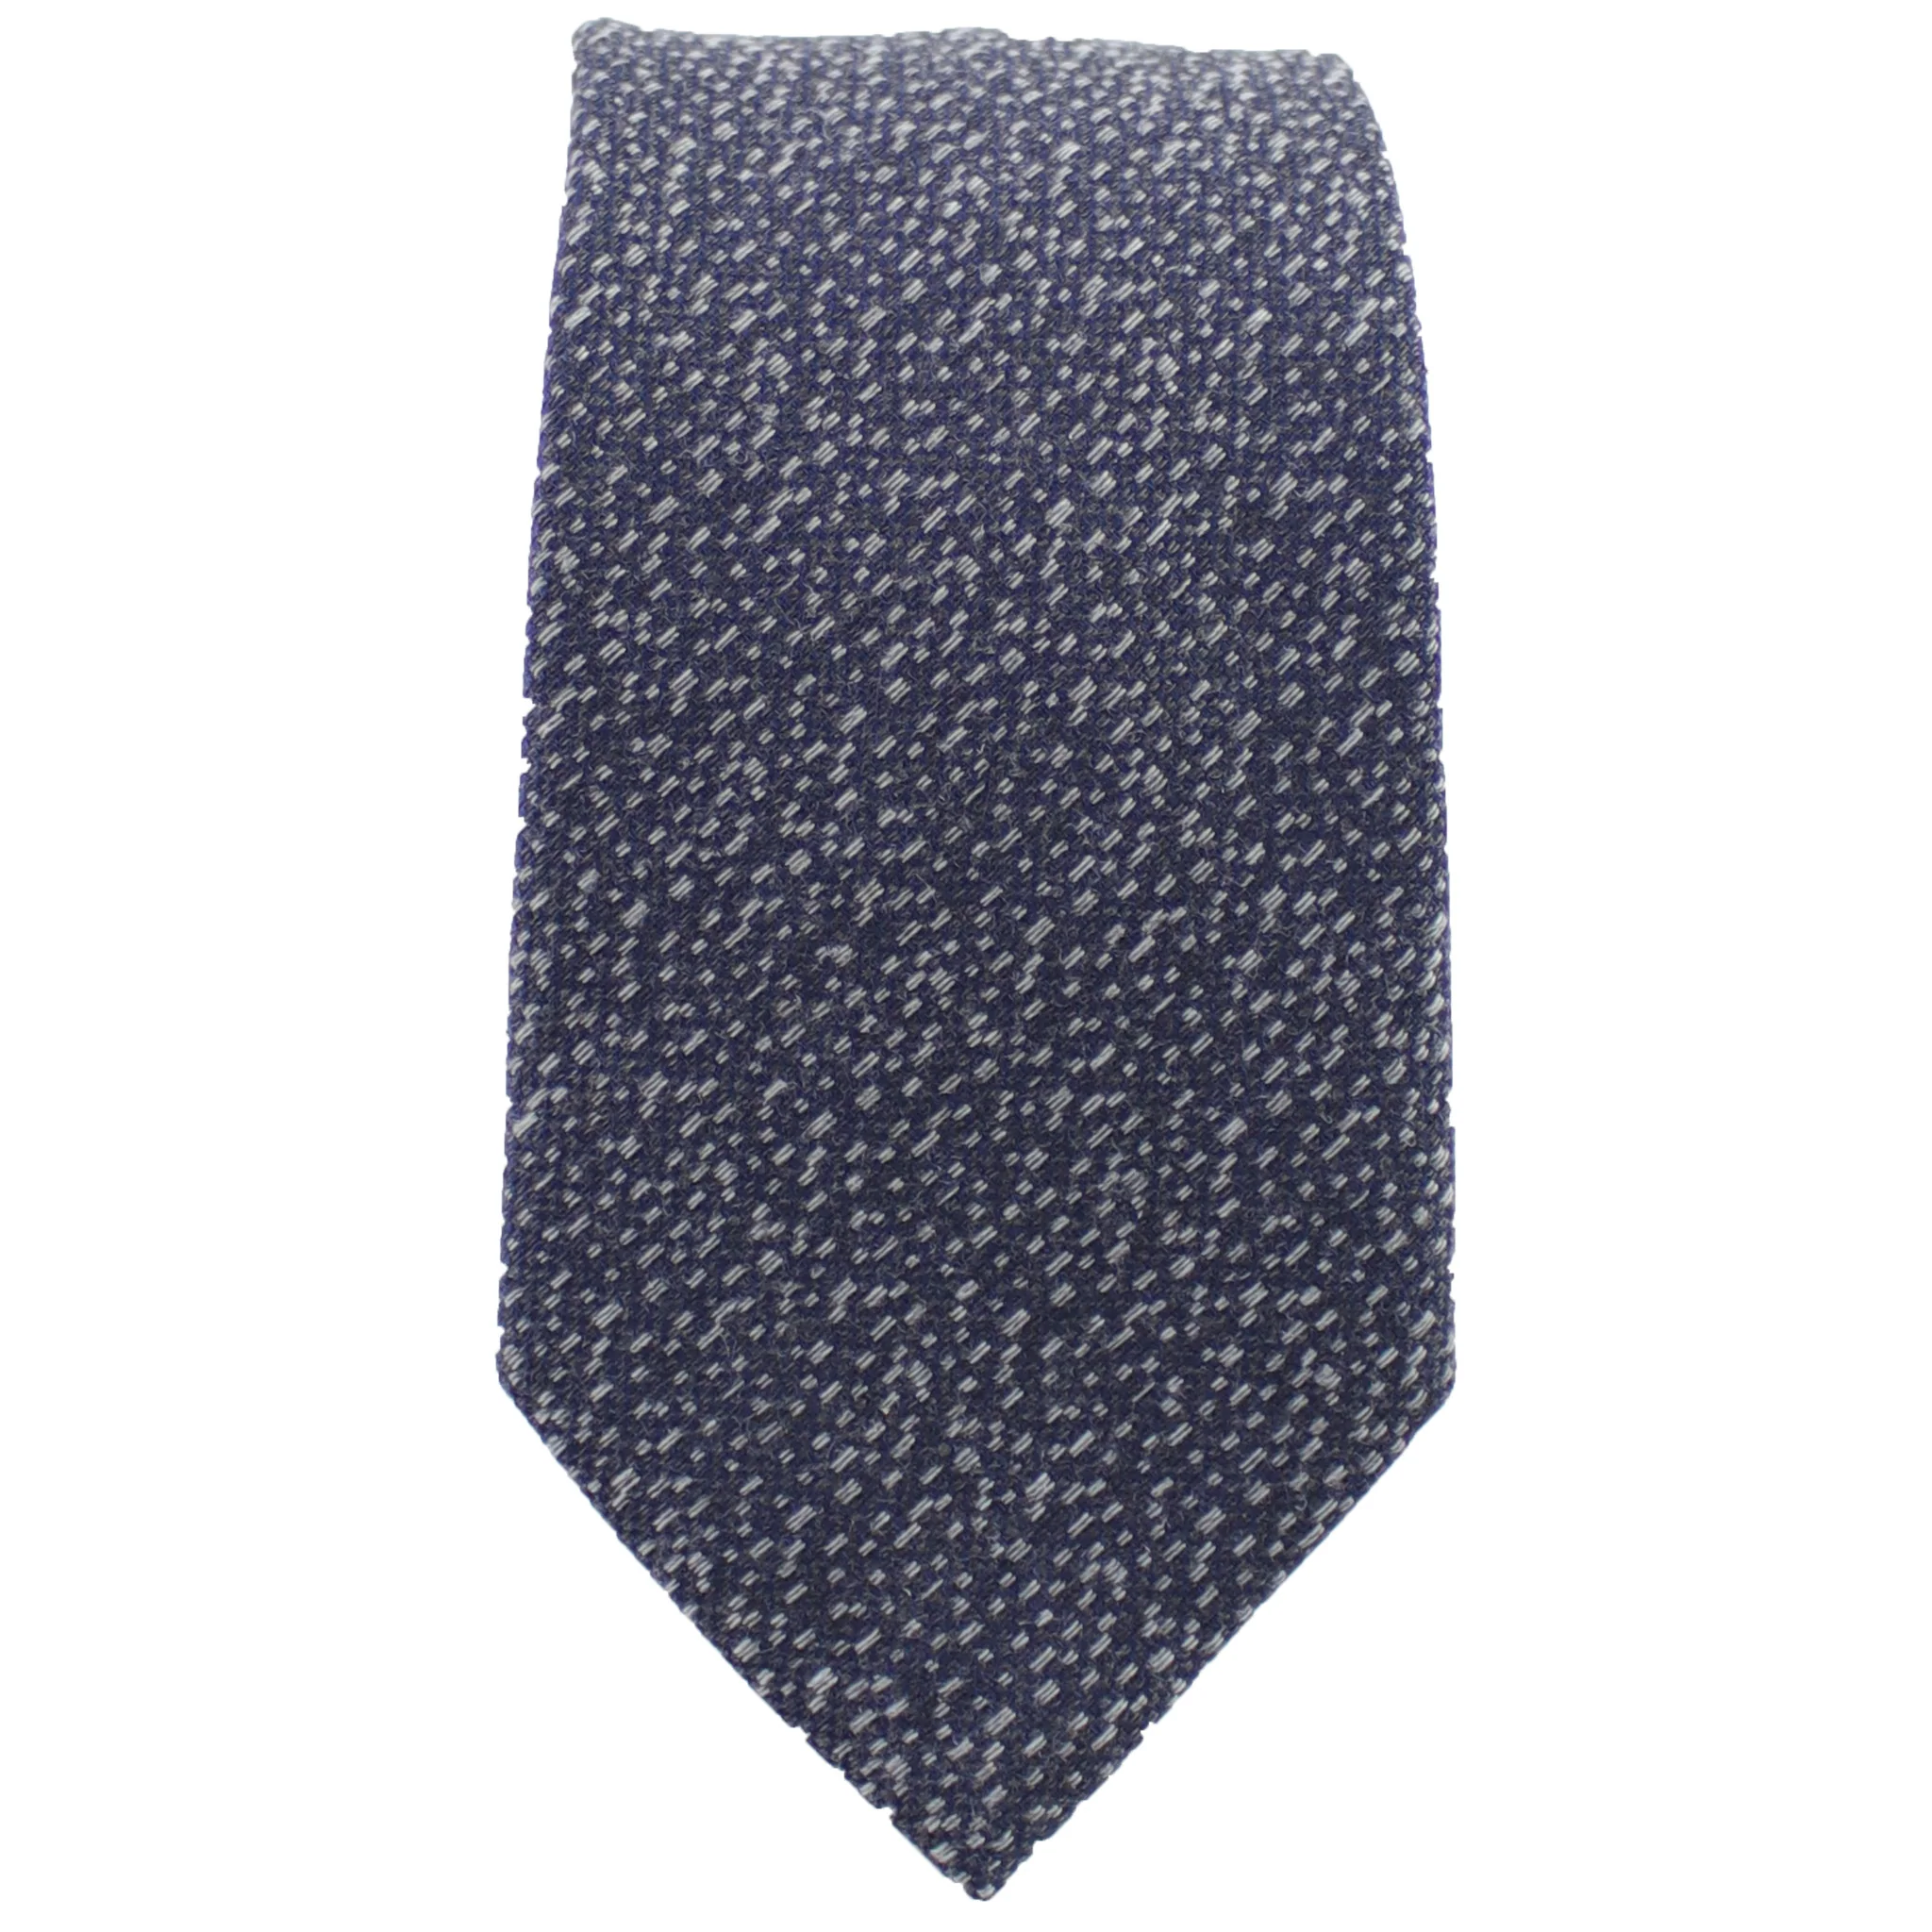 Charcoal & Silver Heather Tie